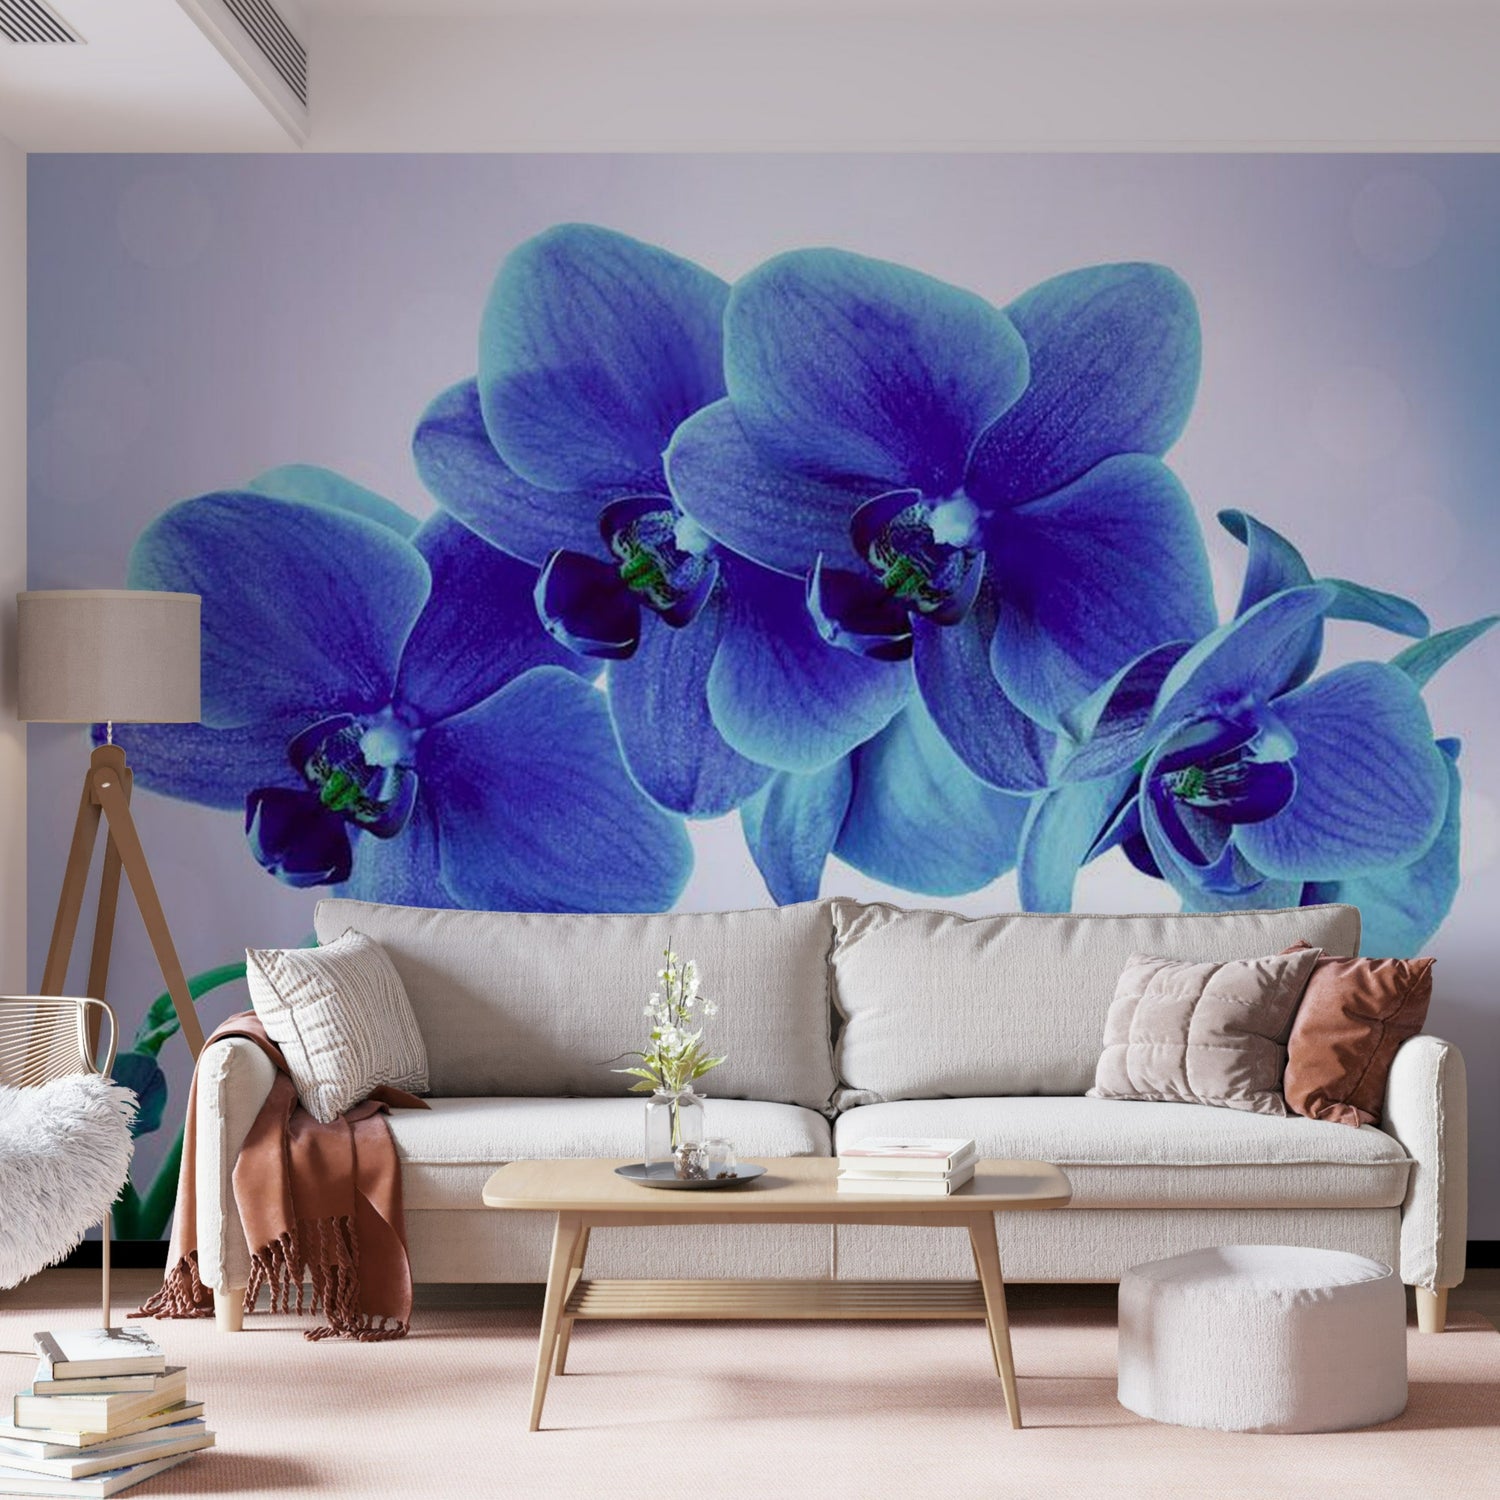 Peel & Stick Floral Wall Mural - Blue Orchids - Removable Wall Decals